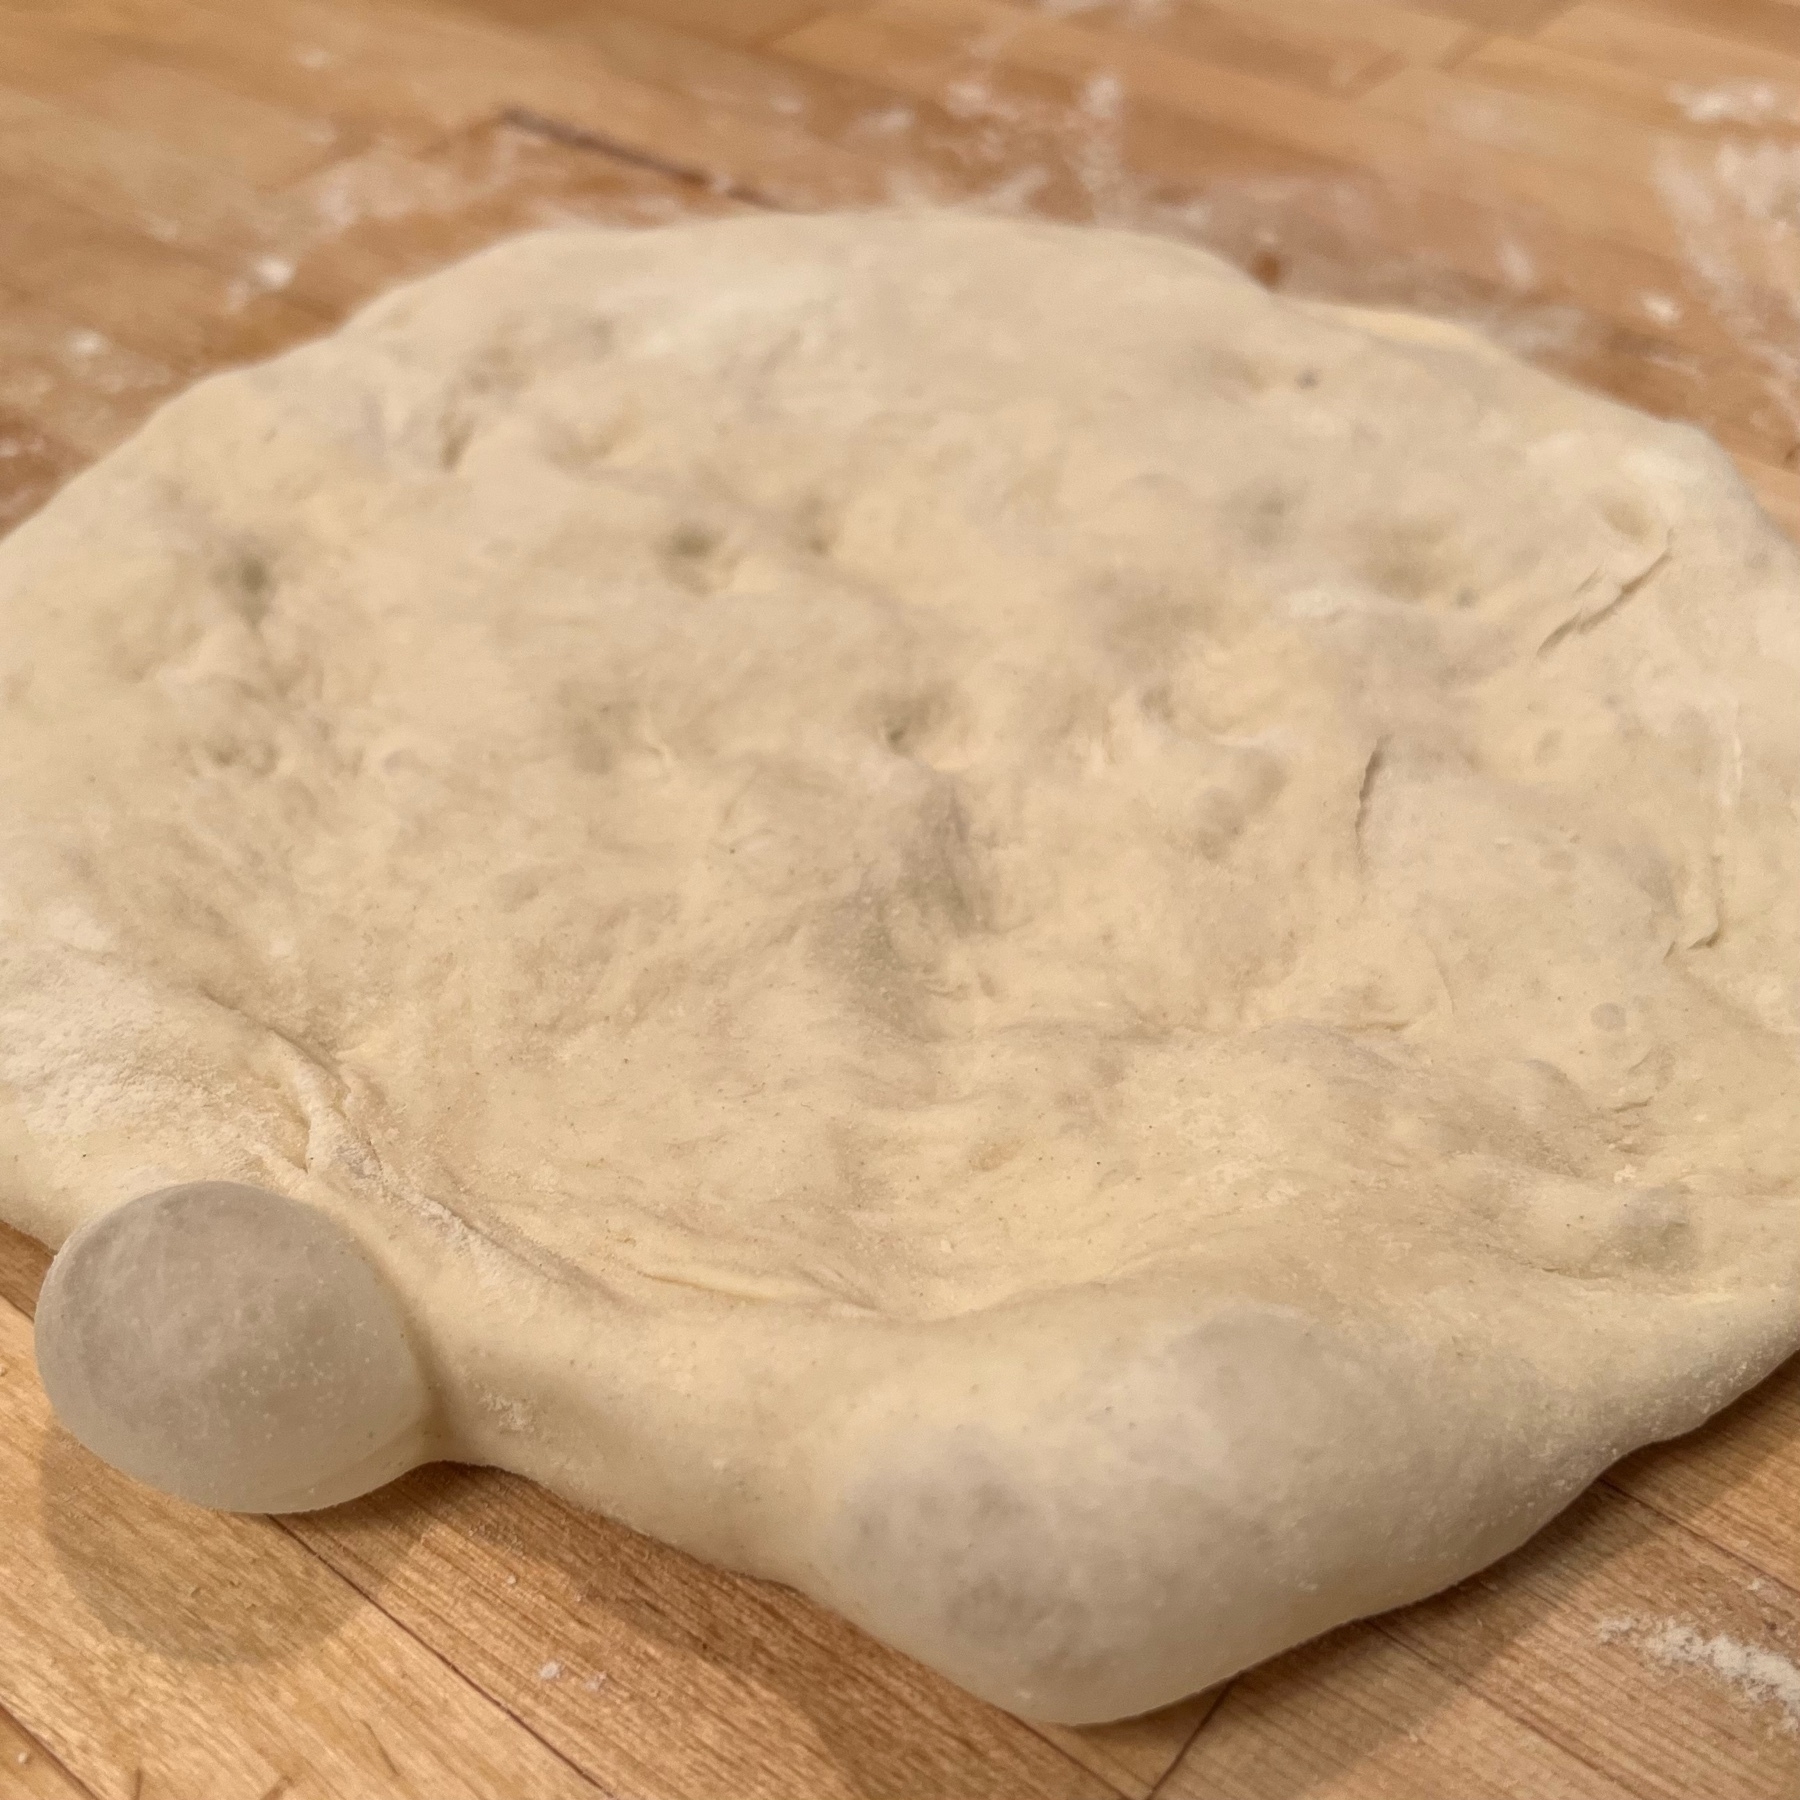 raw dough shaped in a circle with visible bubbles